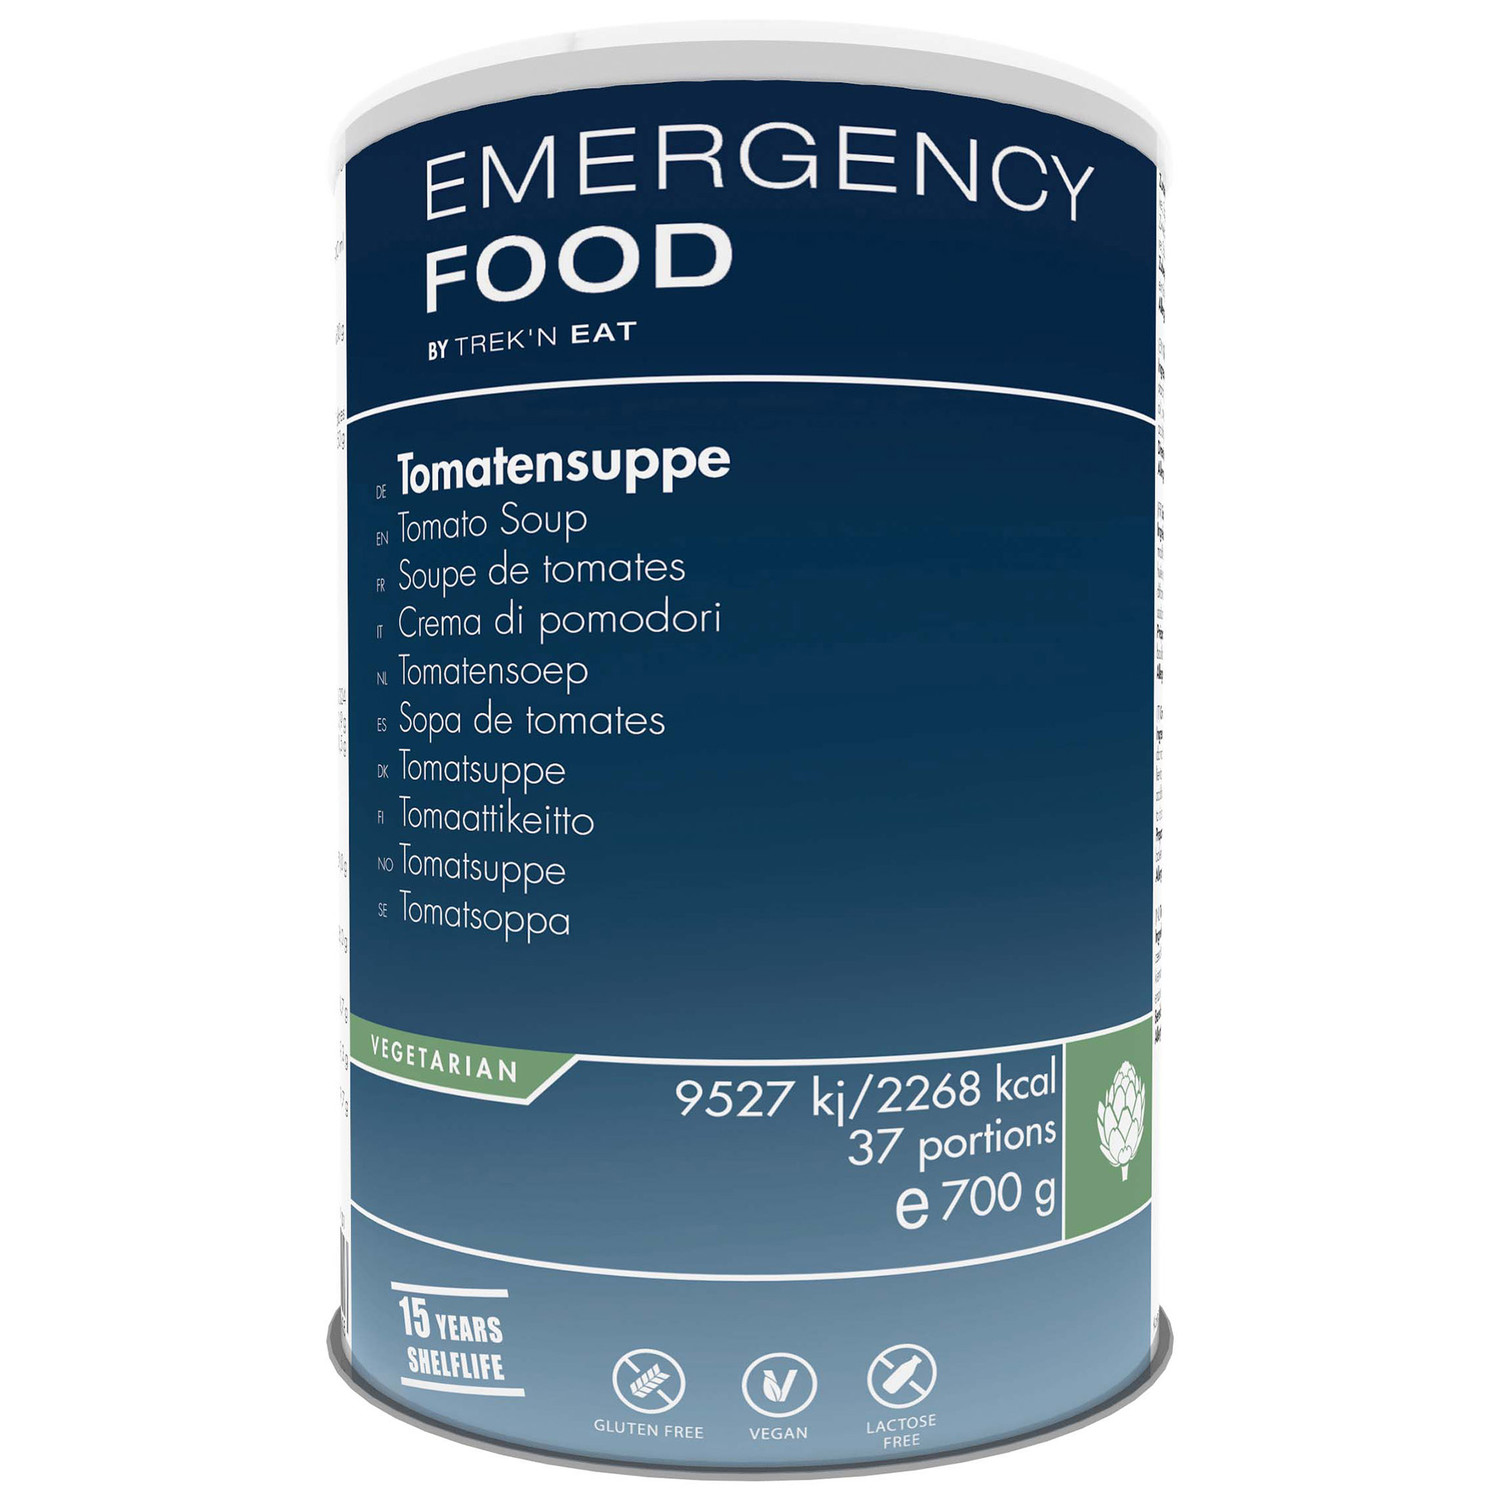 Emergency Food Tomatensuppe